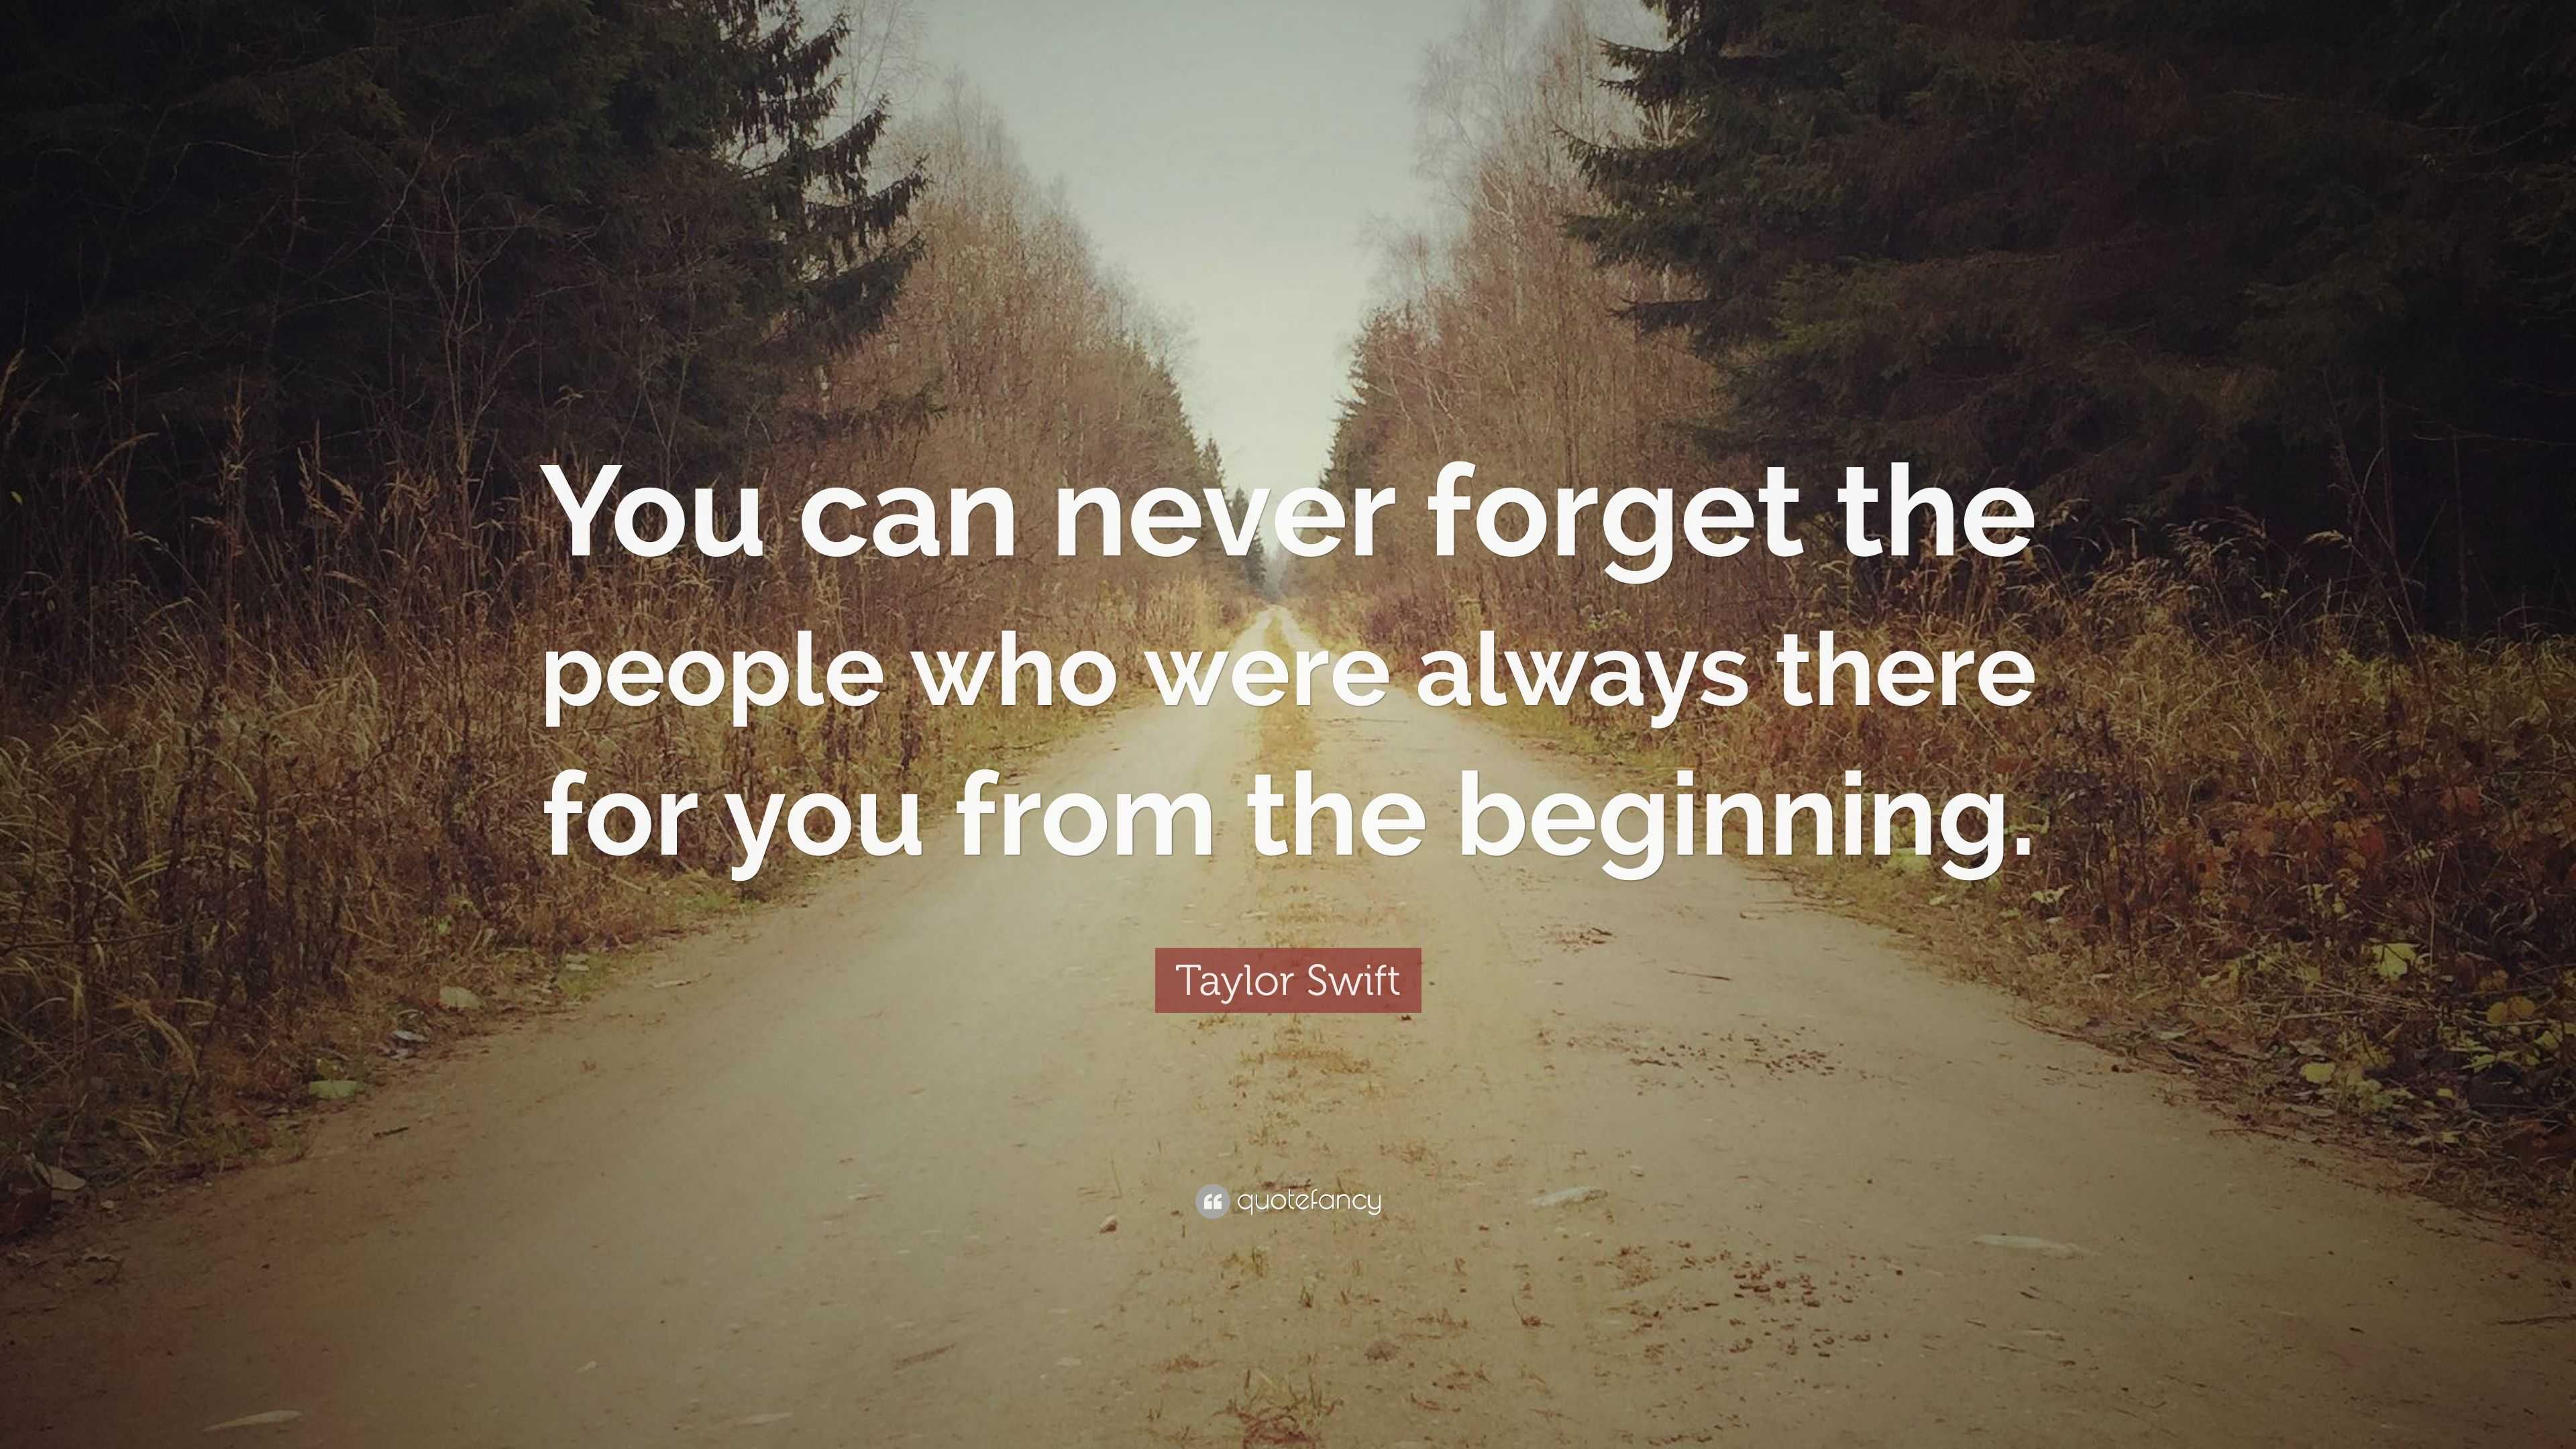 Taylor Swift Quote: “You can never forget the people who were always